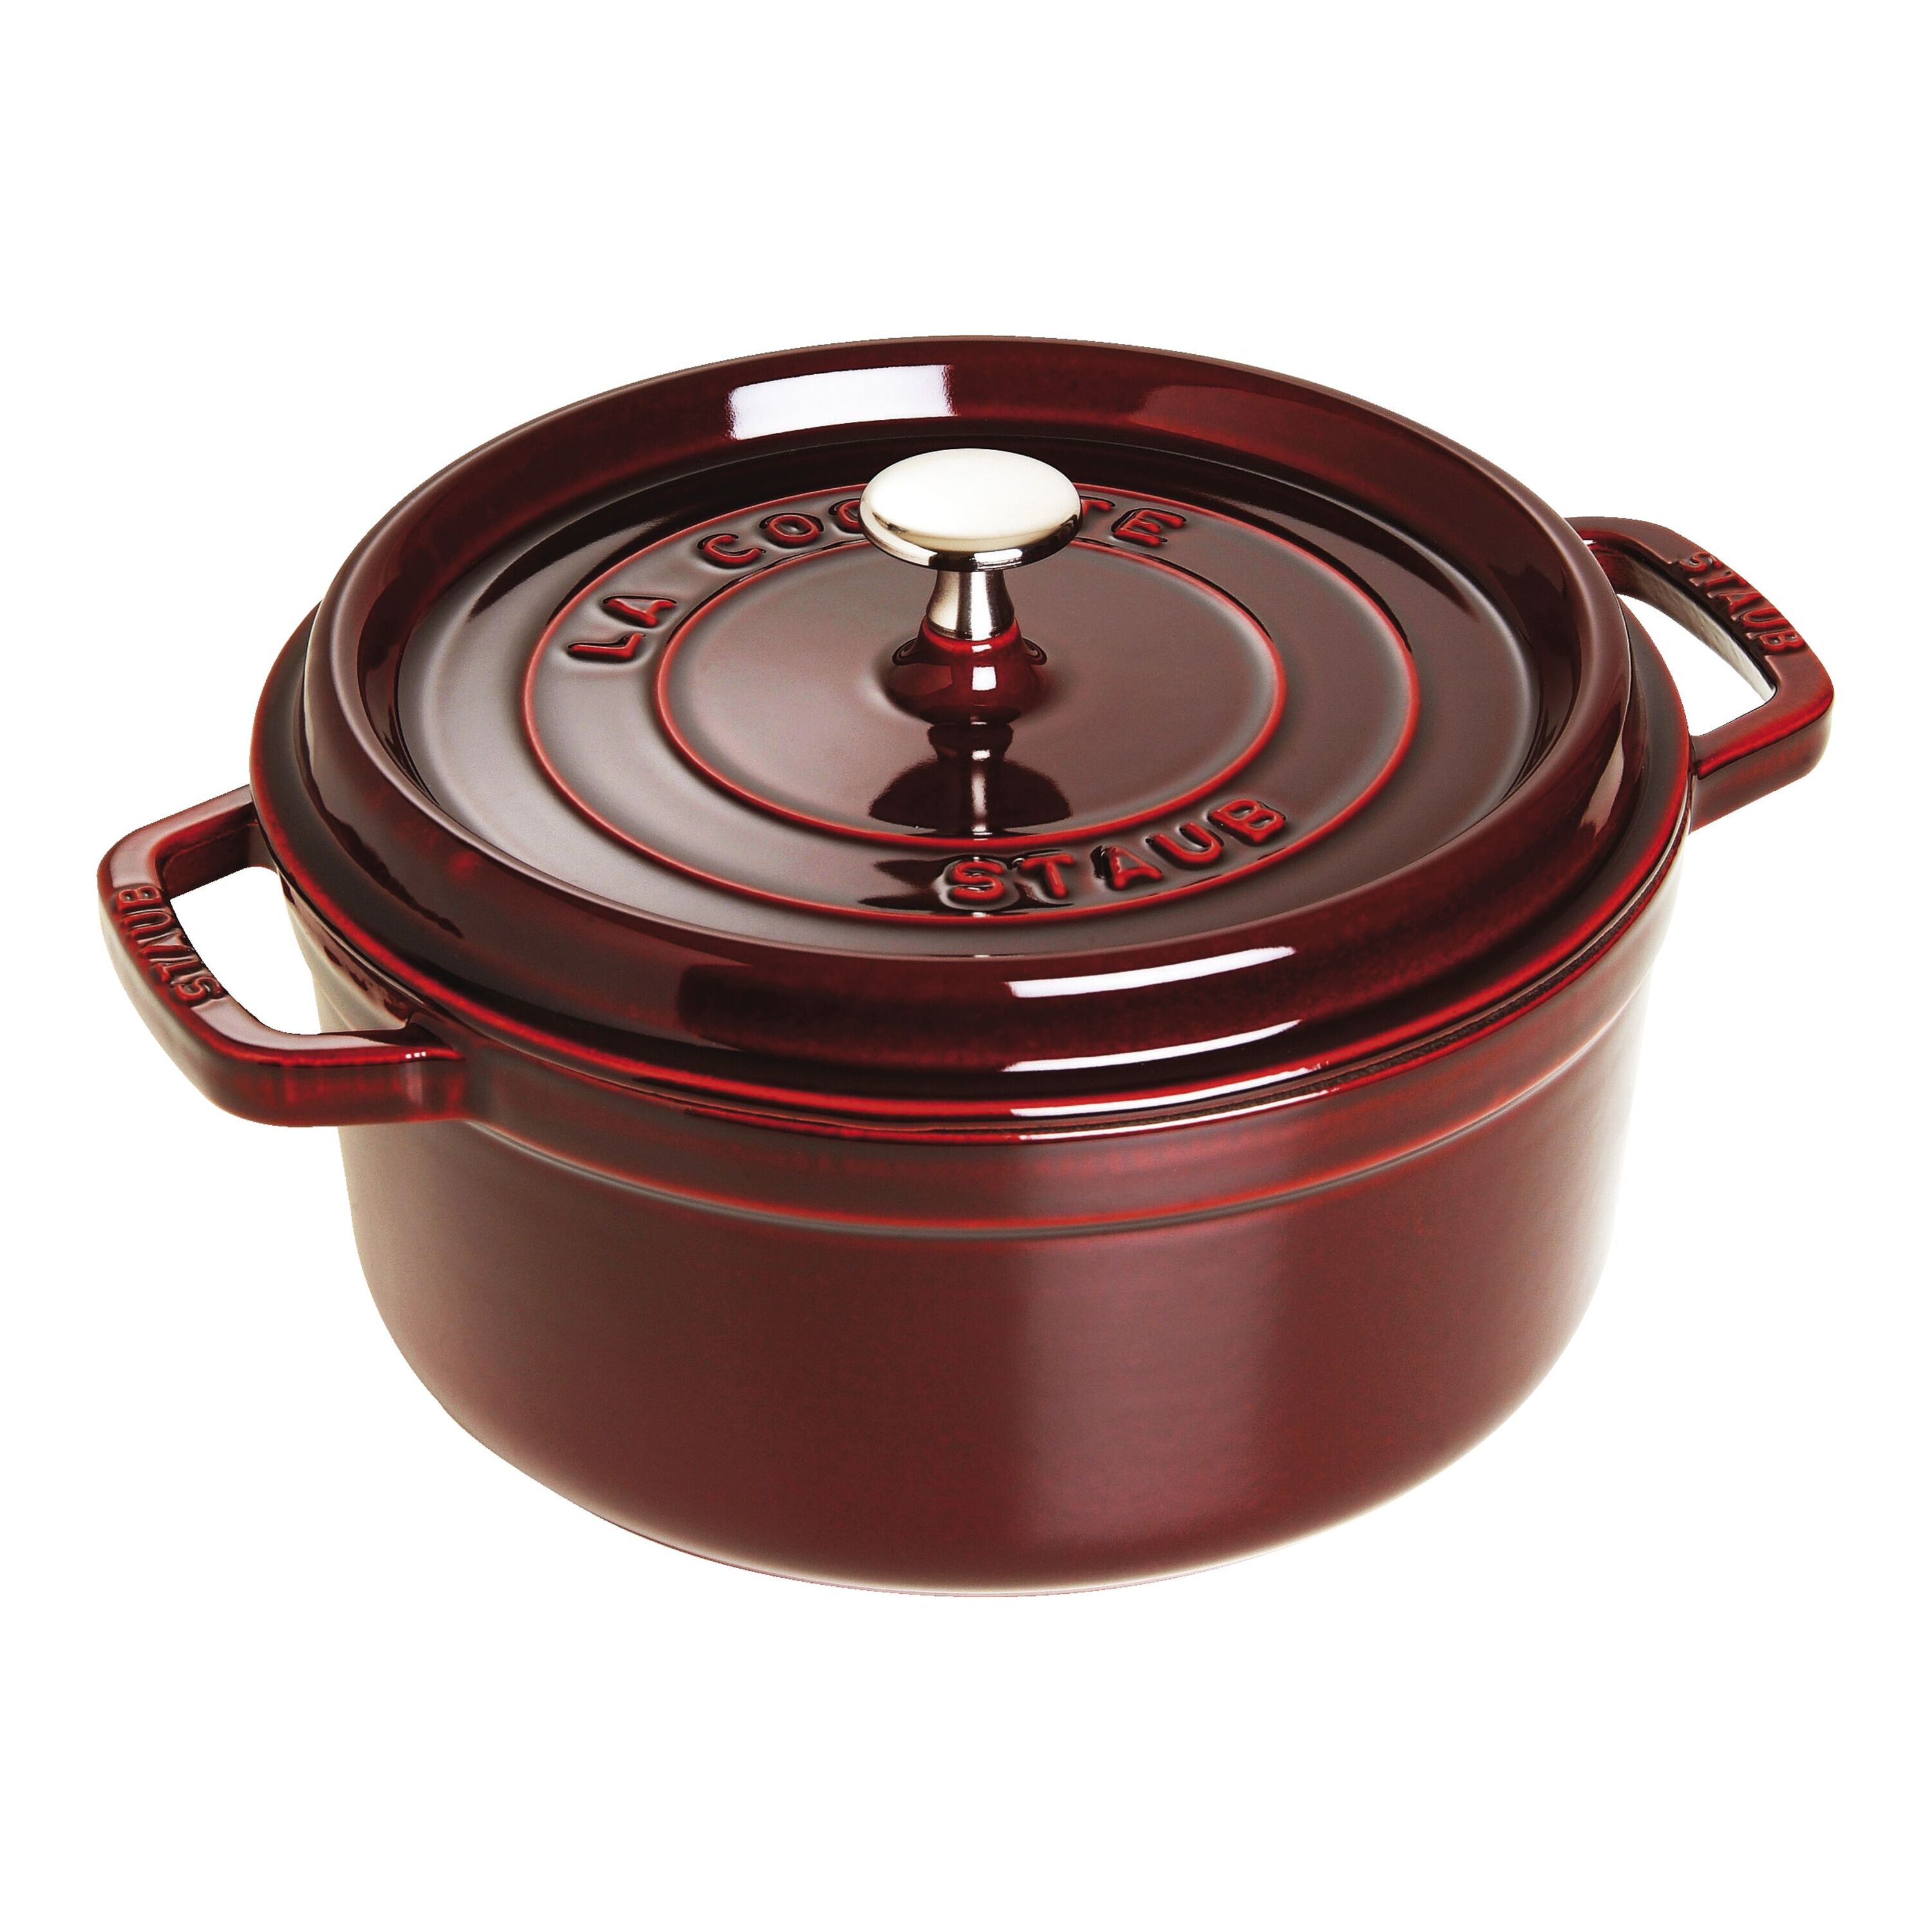  Staub Cast Iron Dutch Oven 5-qt Tall Cocotte, Made in France,  Serves 5-6, Matte Black: Home & Kitchen